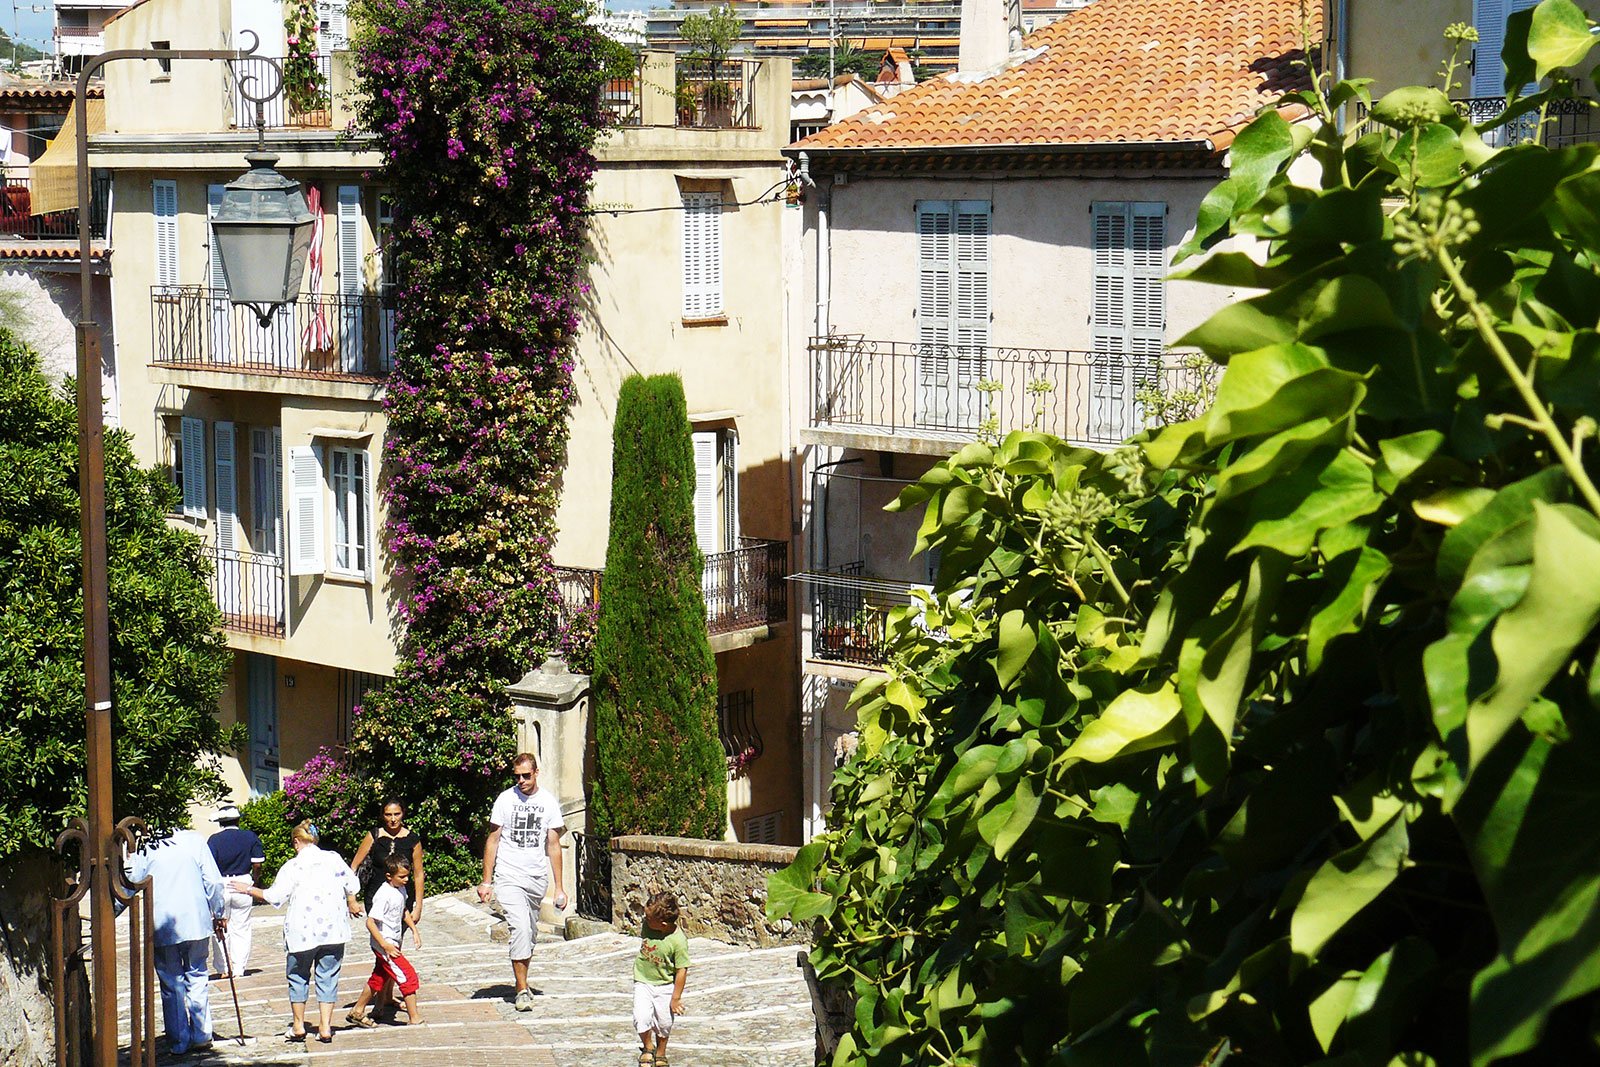 How to walk through the Old City in Cannes